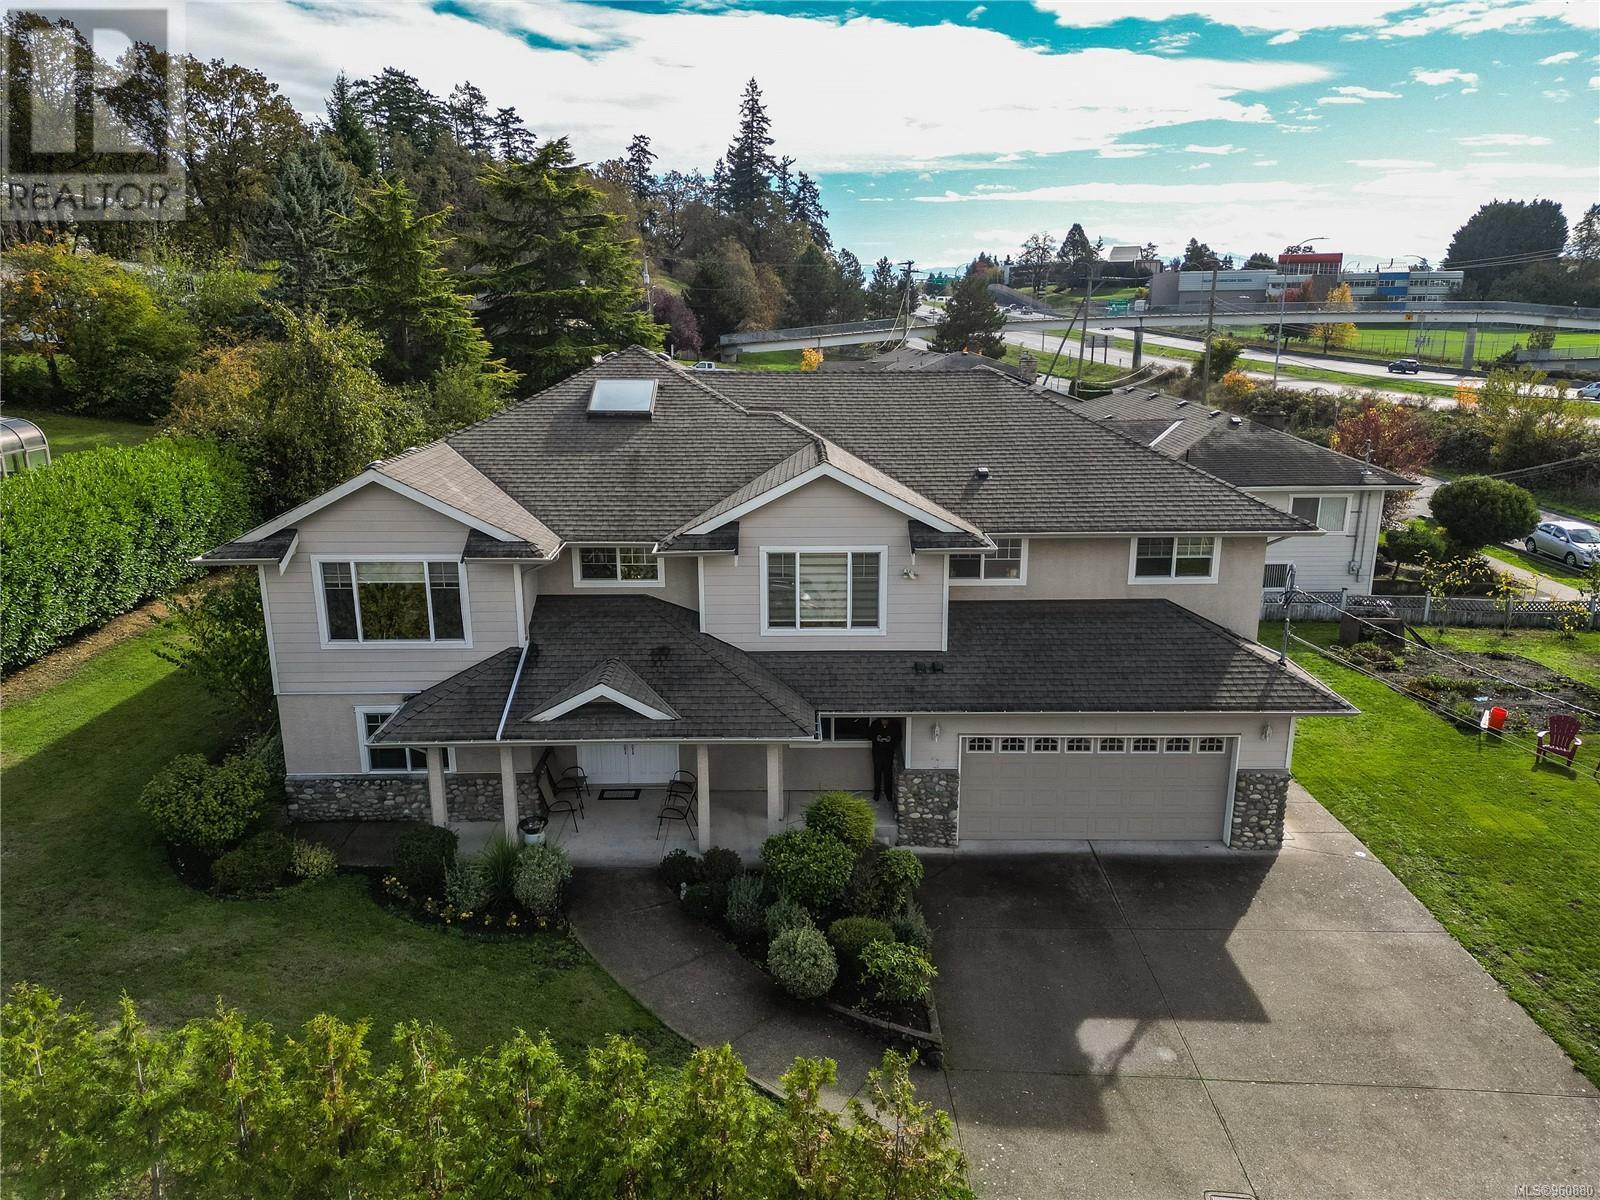 4 Bedroom Residential Home For Sale | 705 Chesterlea Rd | Saanich | V8X3R3